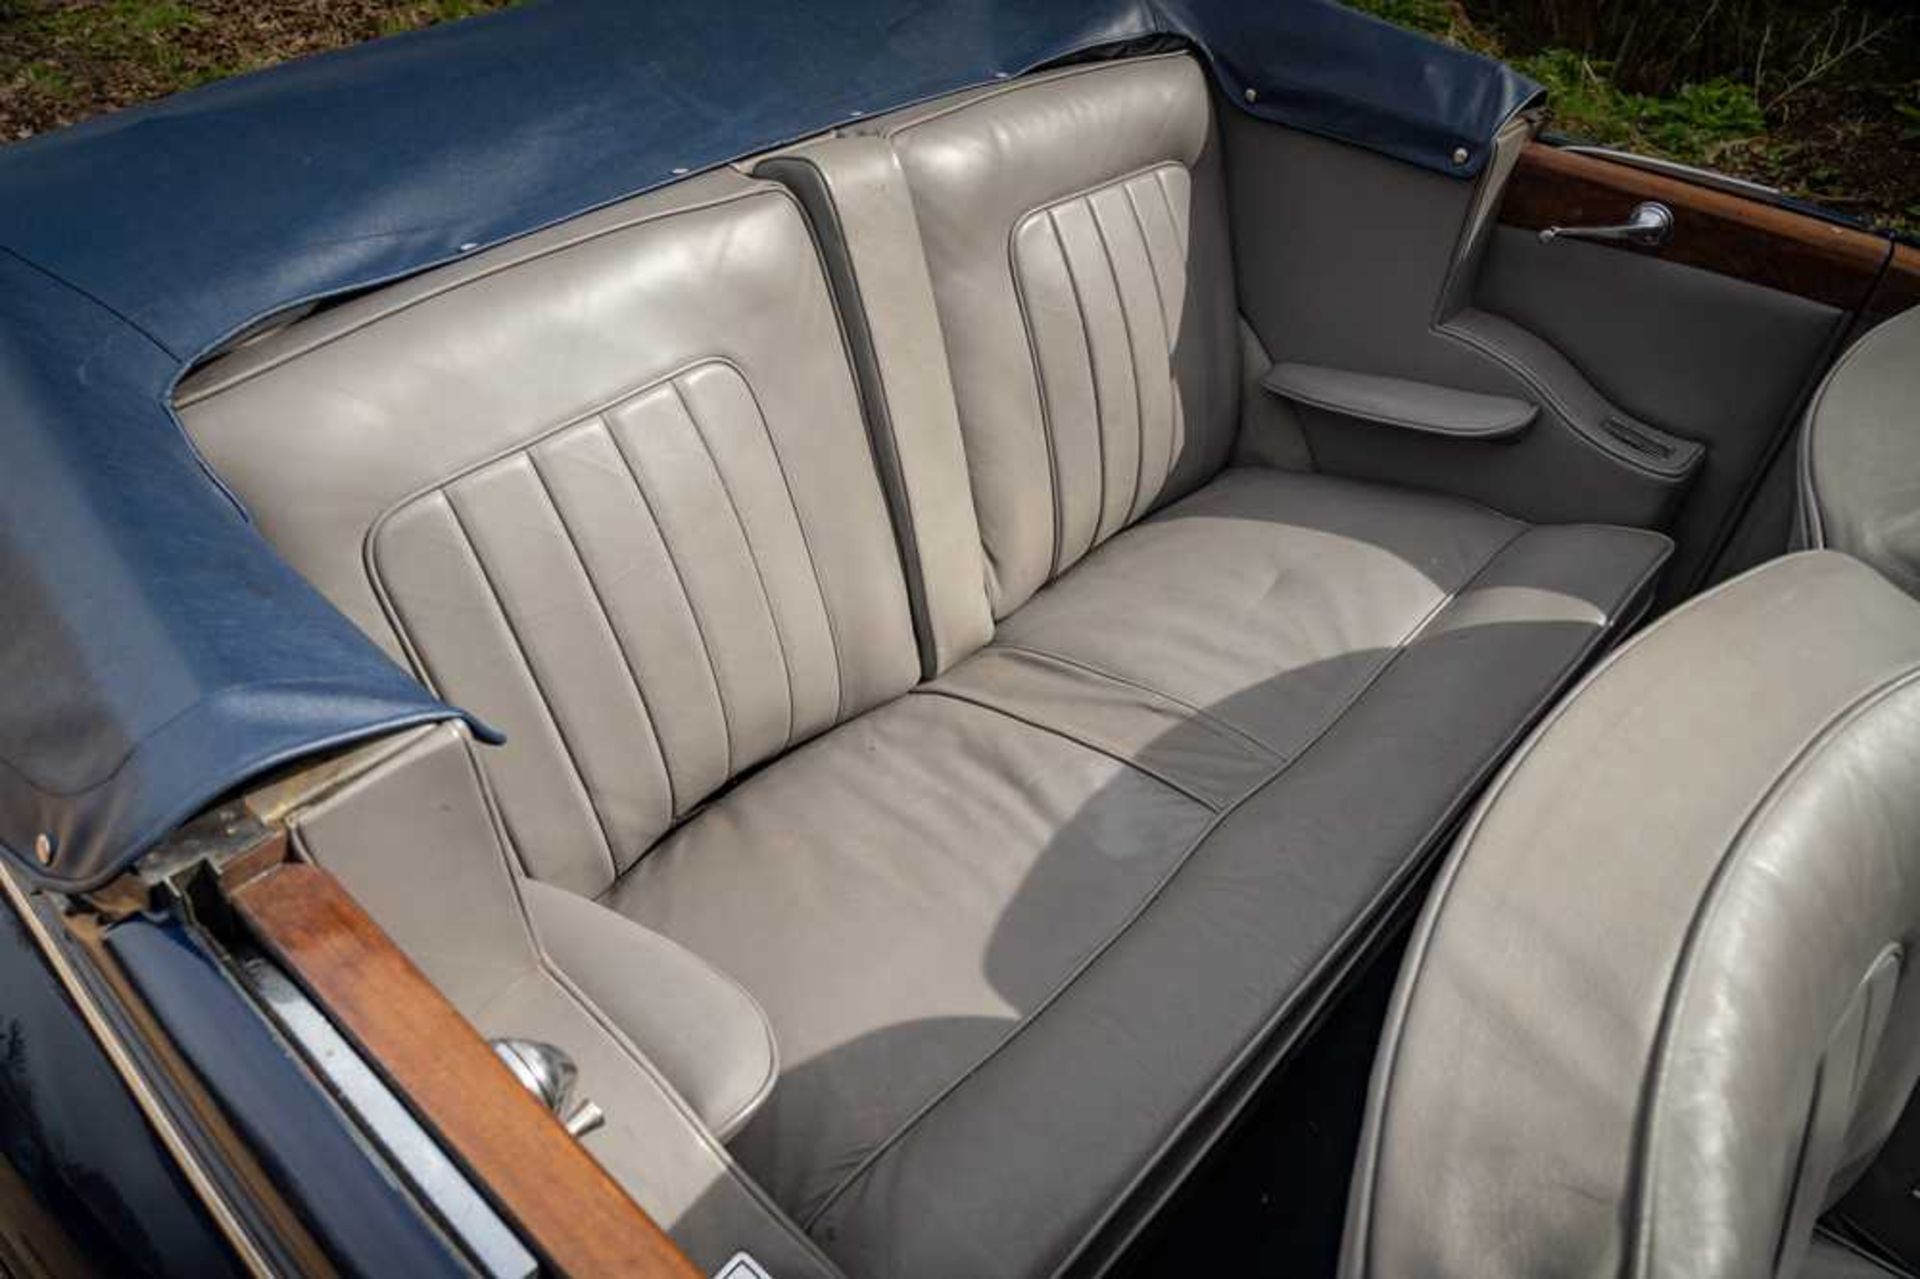 1954 Bentley R-Type Park Ward Drophead Coupe 1 of just 9 R-Type chassis clothed to Design 552 - Image 86 of 86